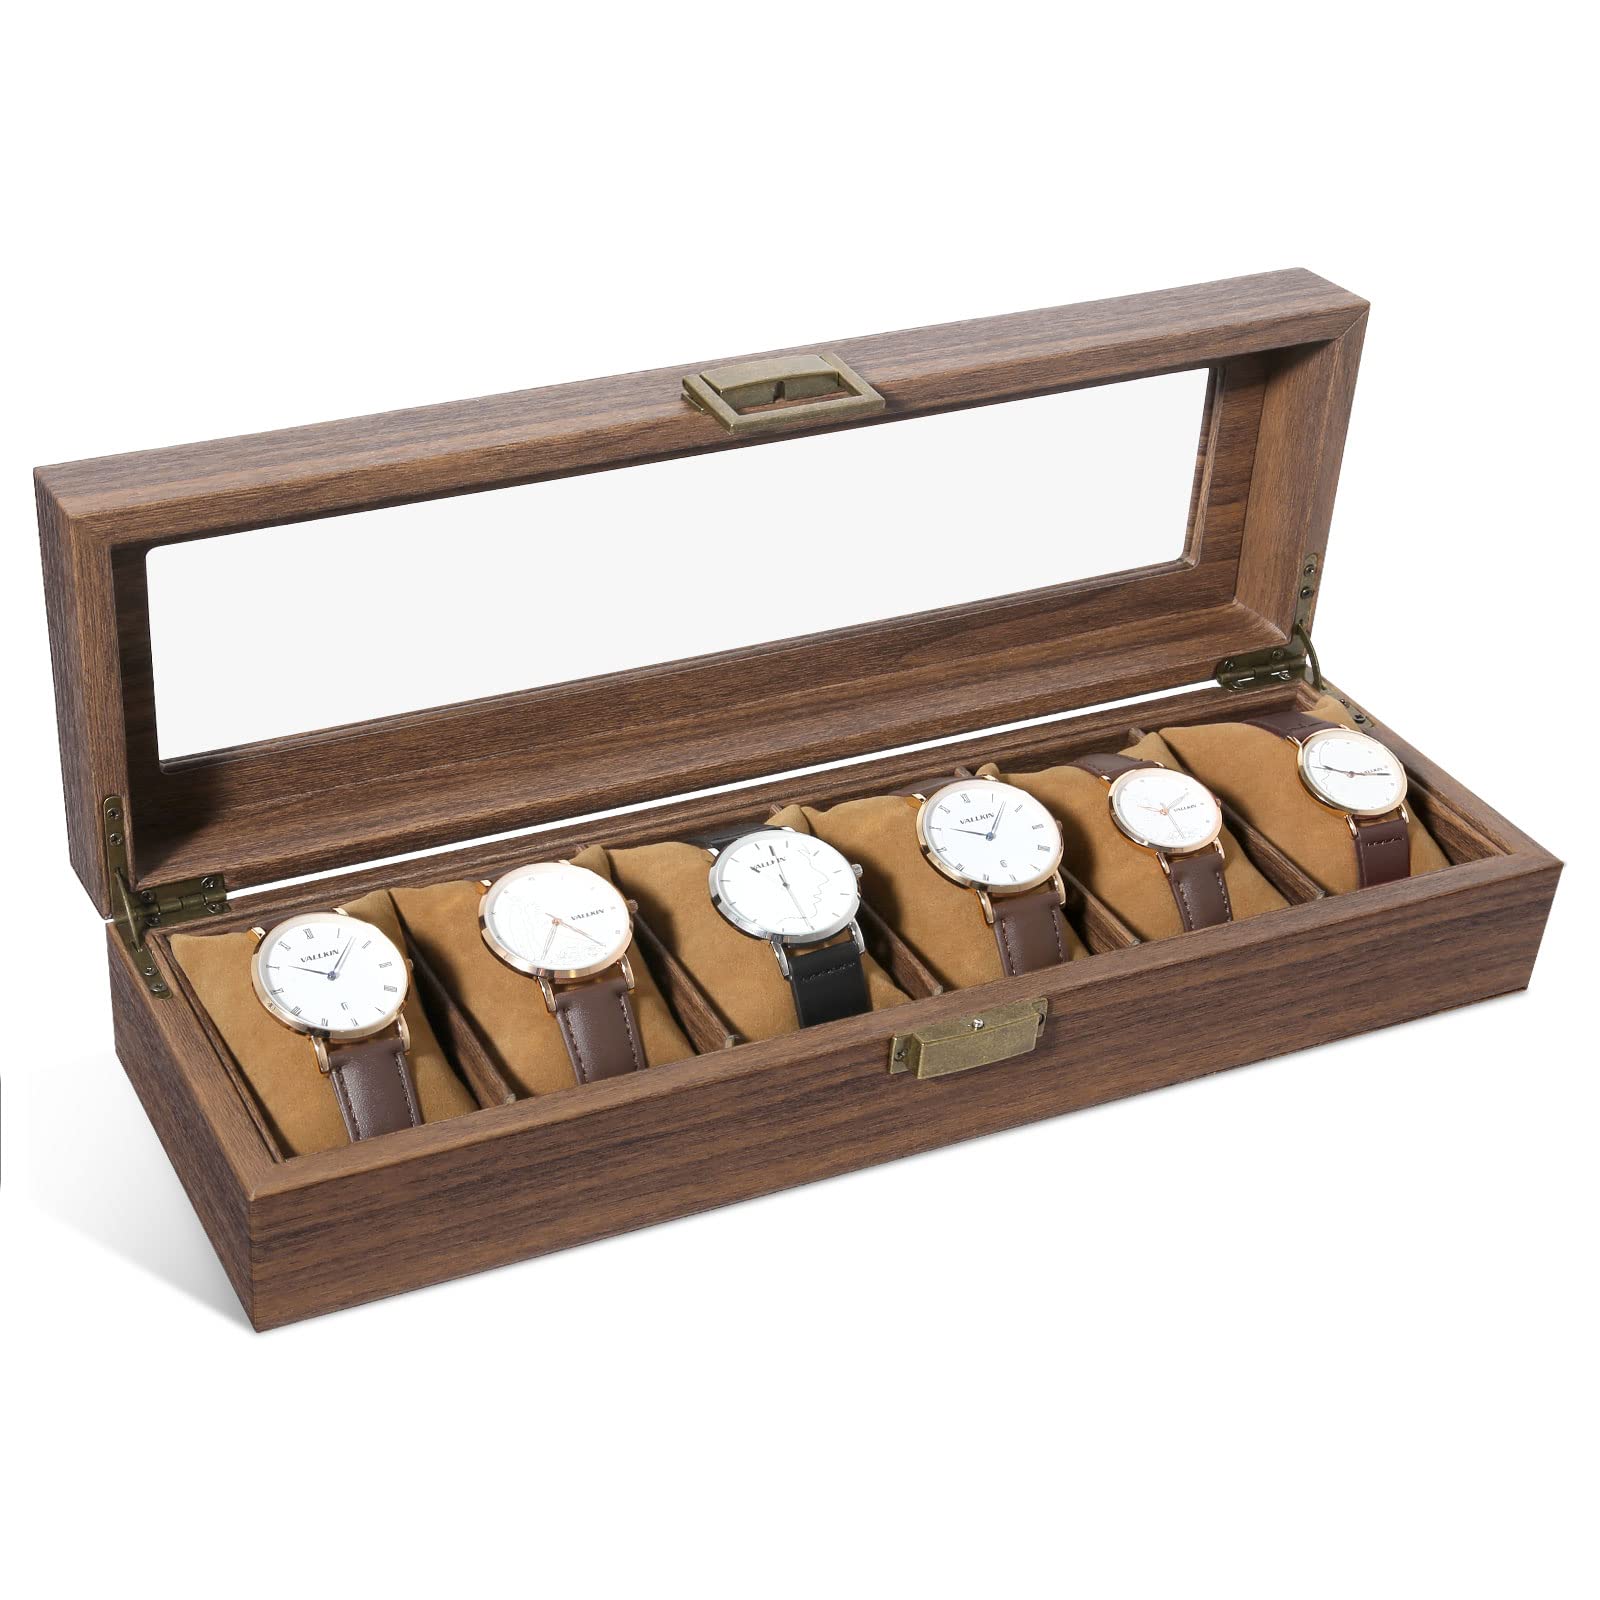 Uten Watch Box with 6 Slots, Watch Case Organizer with Real Glass Lid, Wood Grain PU Leather Watch Display Storage Box with Removable Imitation Suede Watch Pillows, Metal Clasp, Gift for Men and Women